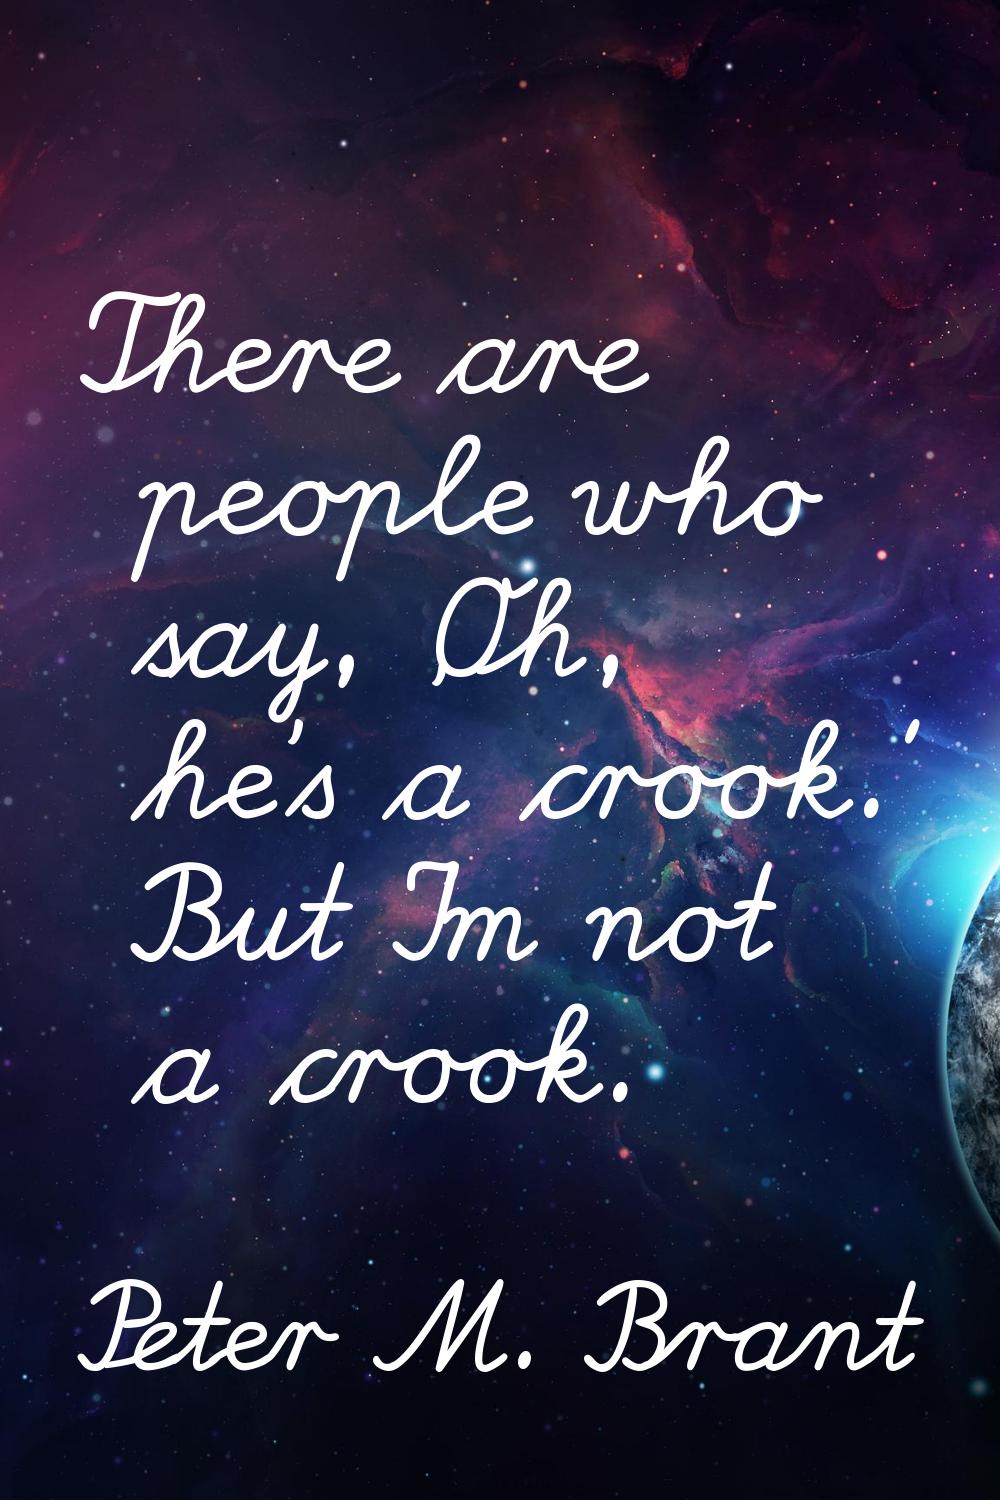 There are people who say, 'Oh, he's a crook.' But I'm not a crook.